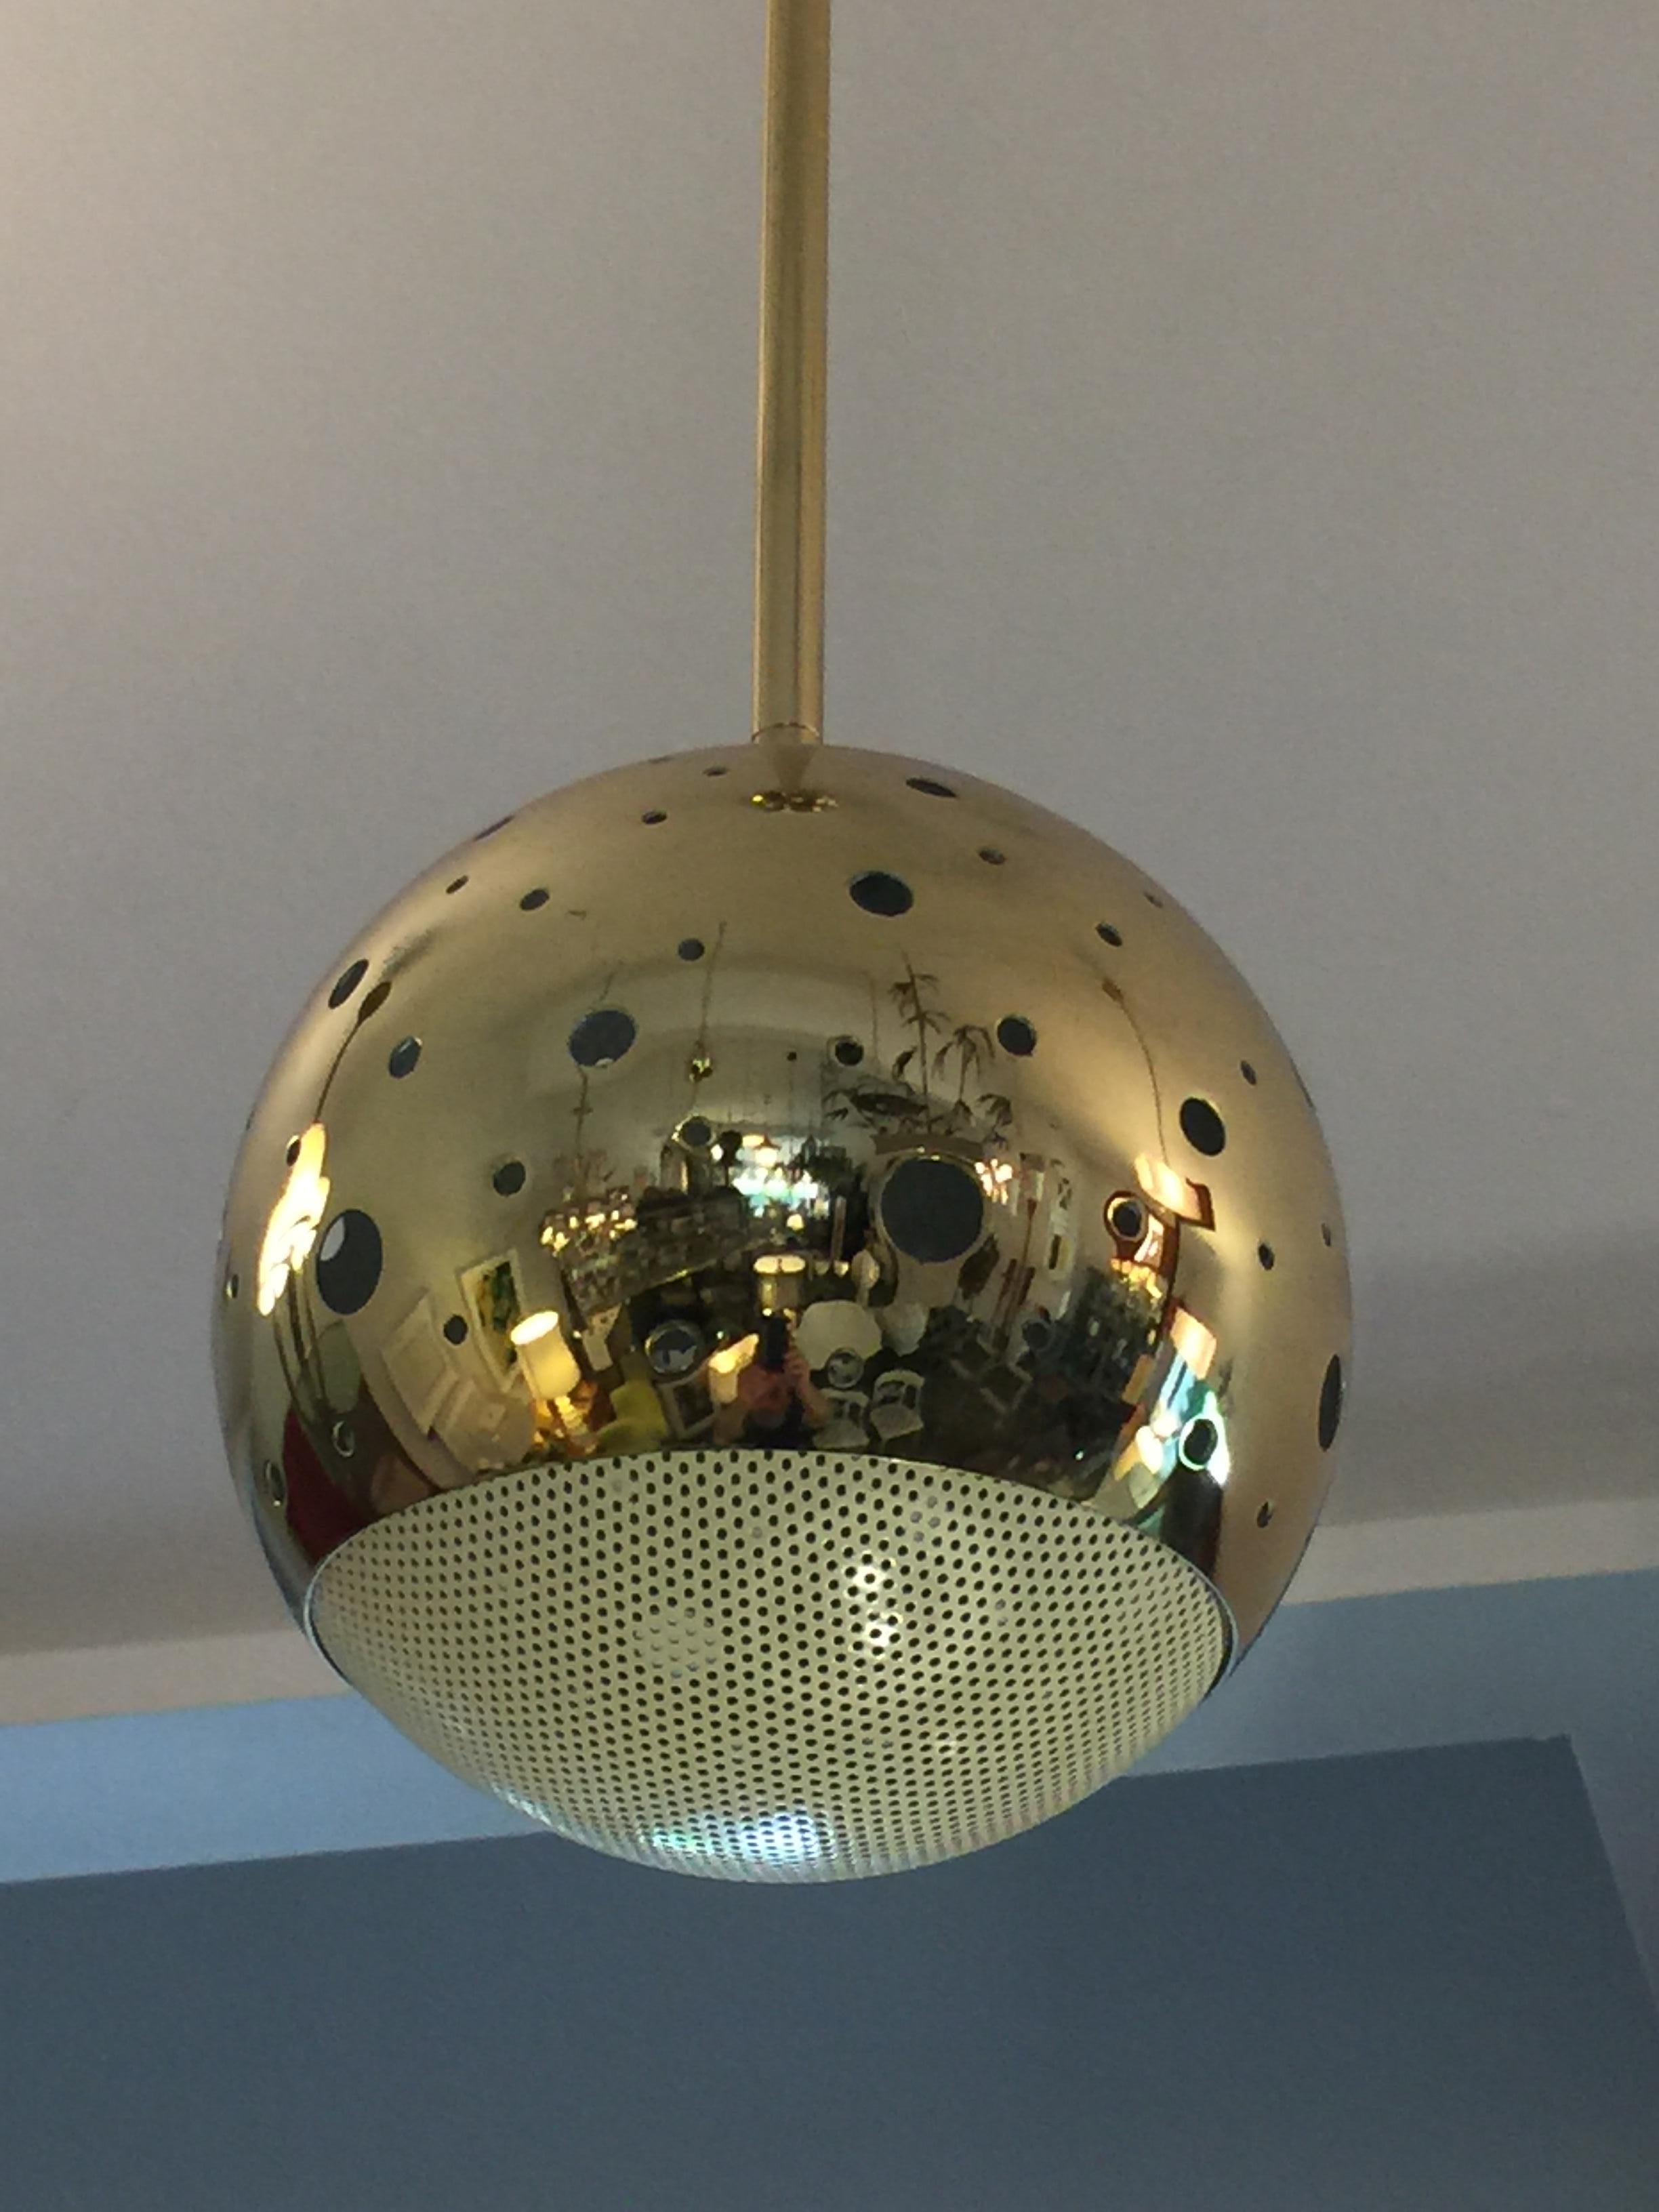 Polished brass perforated grill globe allows for light throughout fixture.